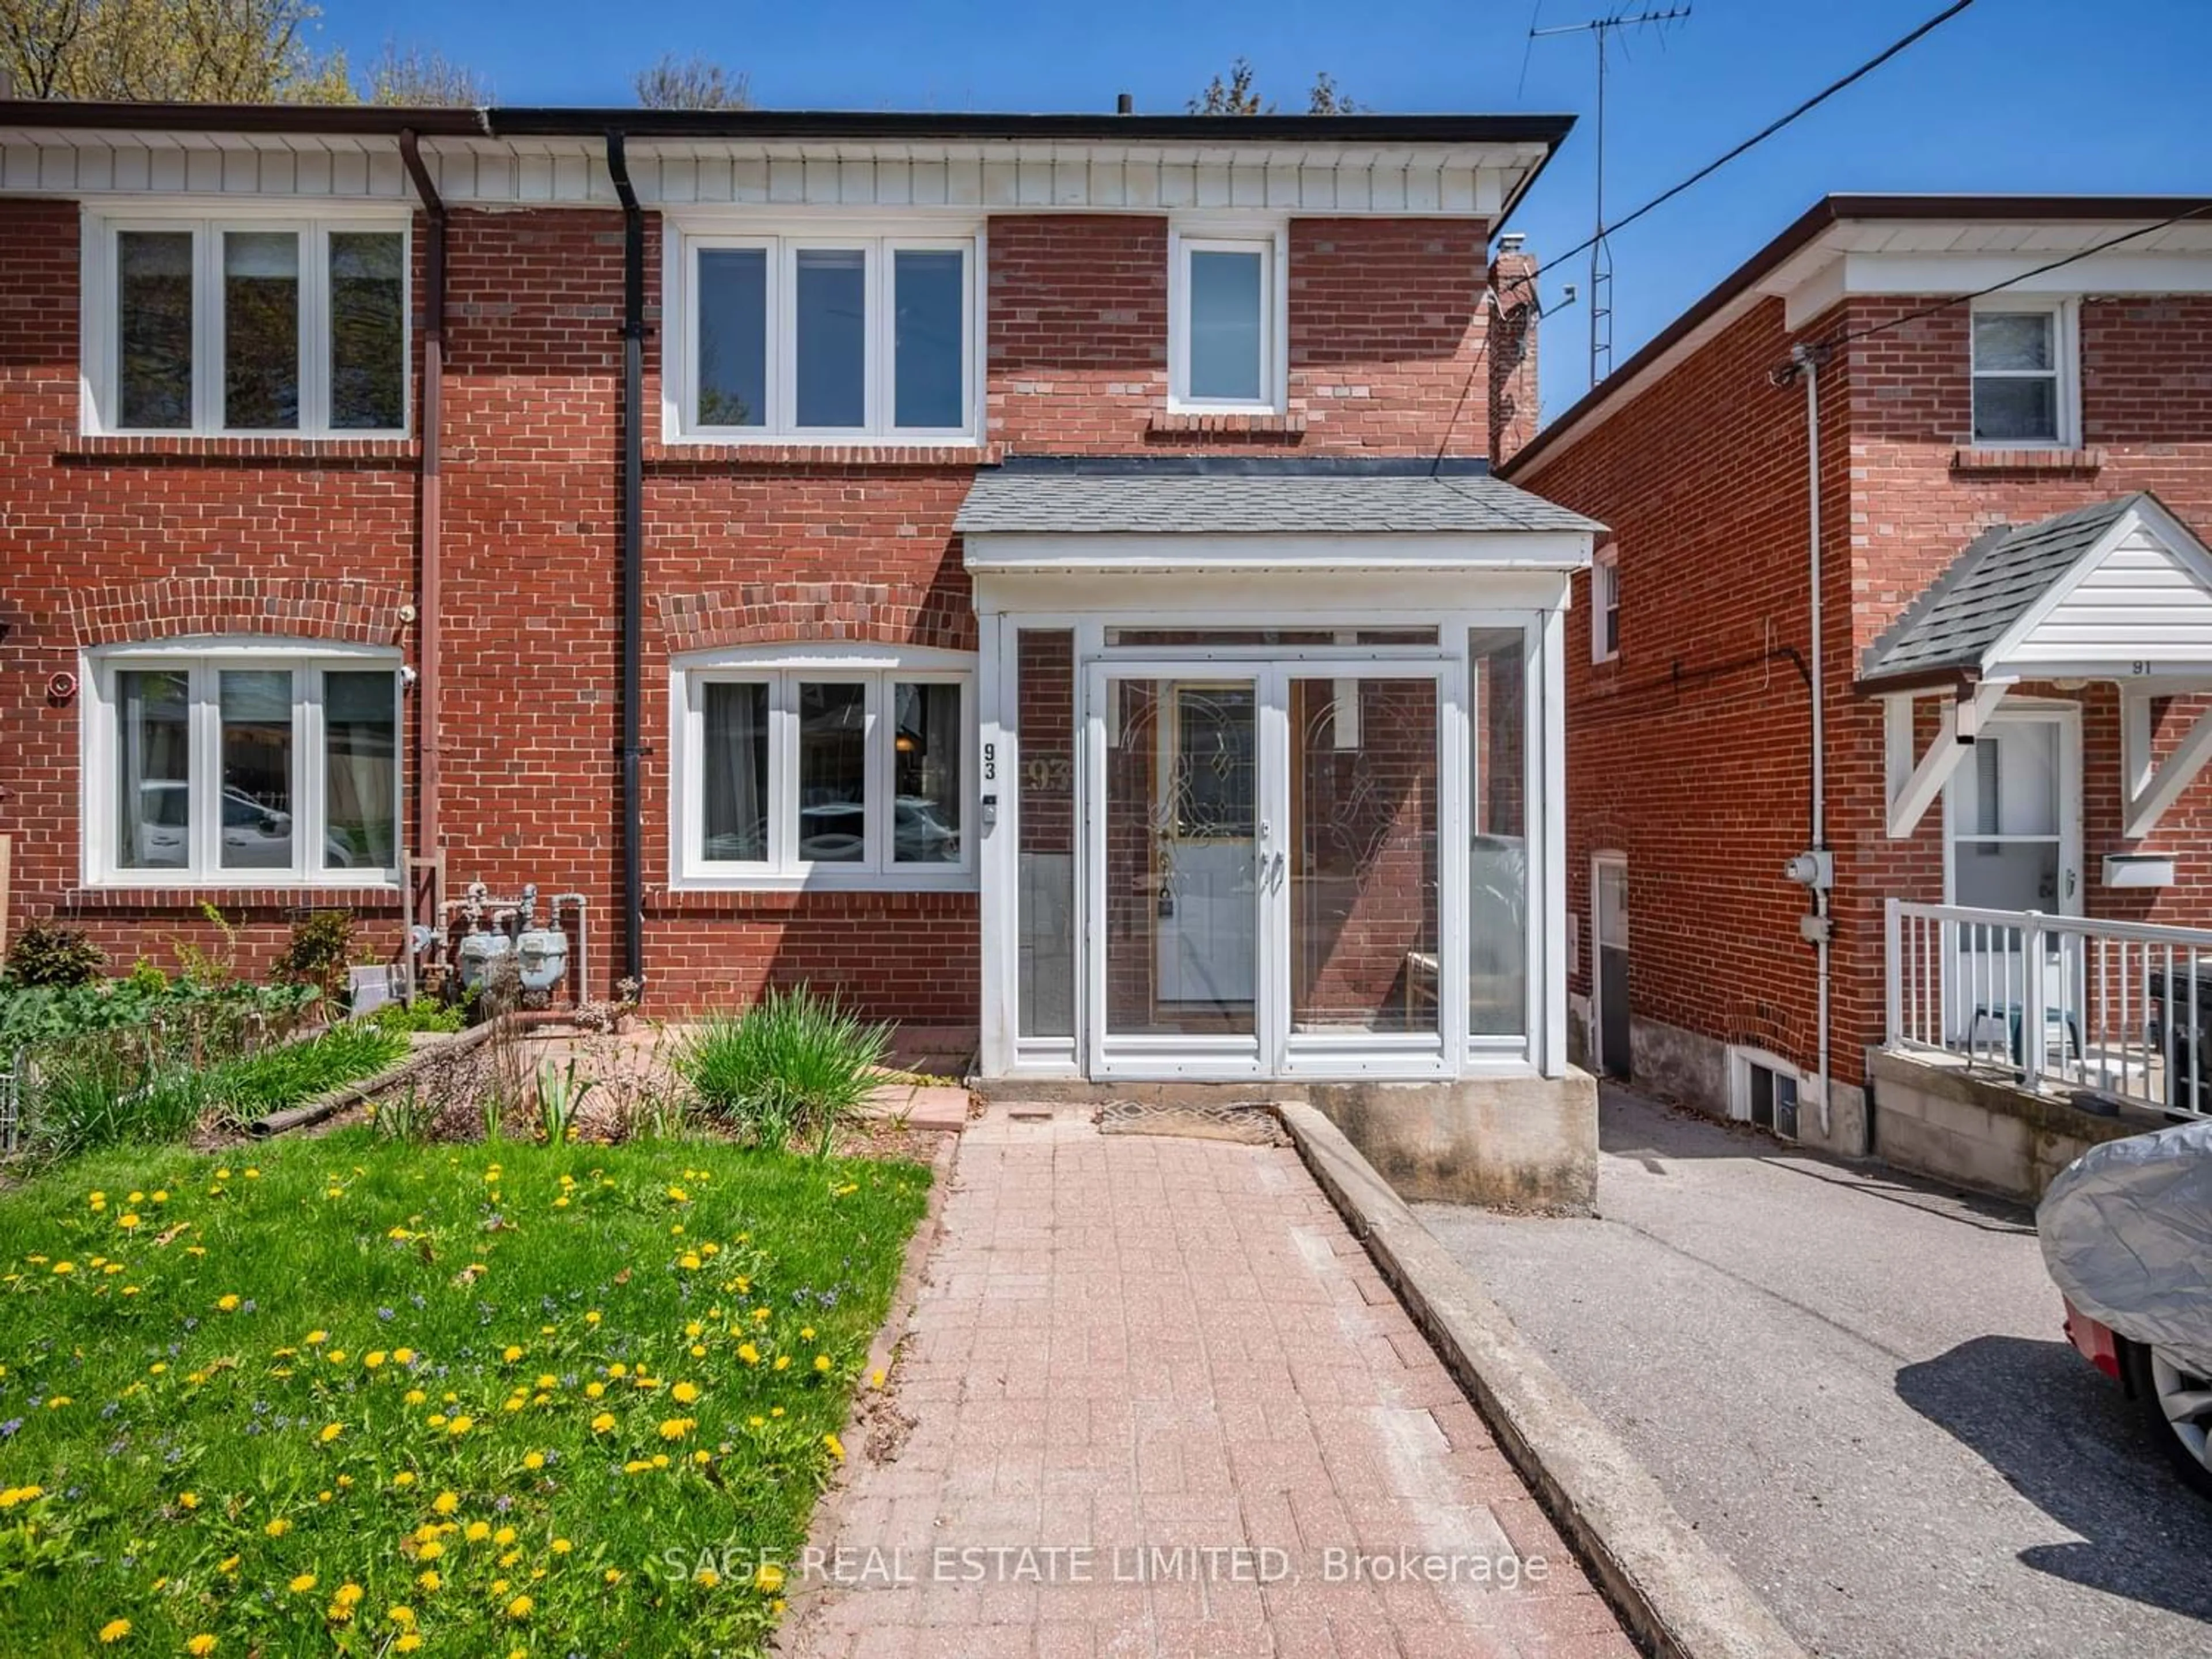 Home with brick exterior material for 93 Billings Ave, Toronto Ontario M4L 2S3